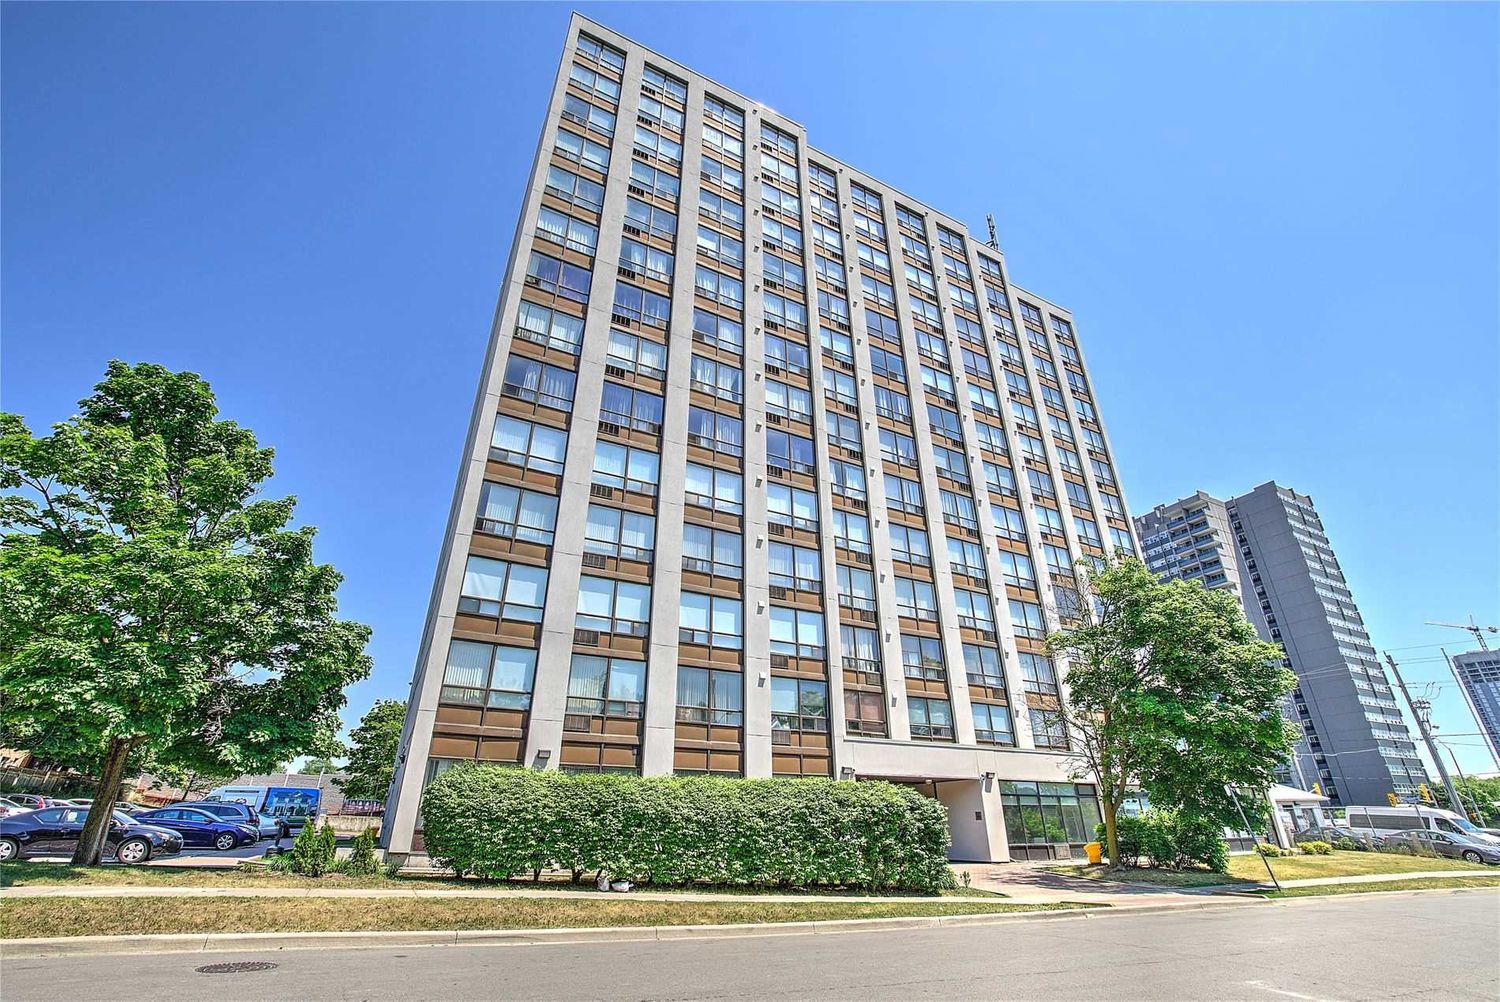 1 Reidmount Avenue. Sheppard Point Condos is located in  Scarborough, Toronto - image #2 of 3